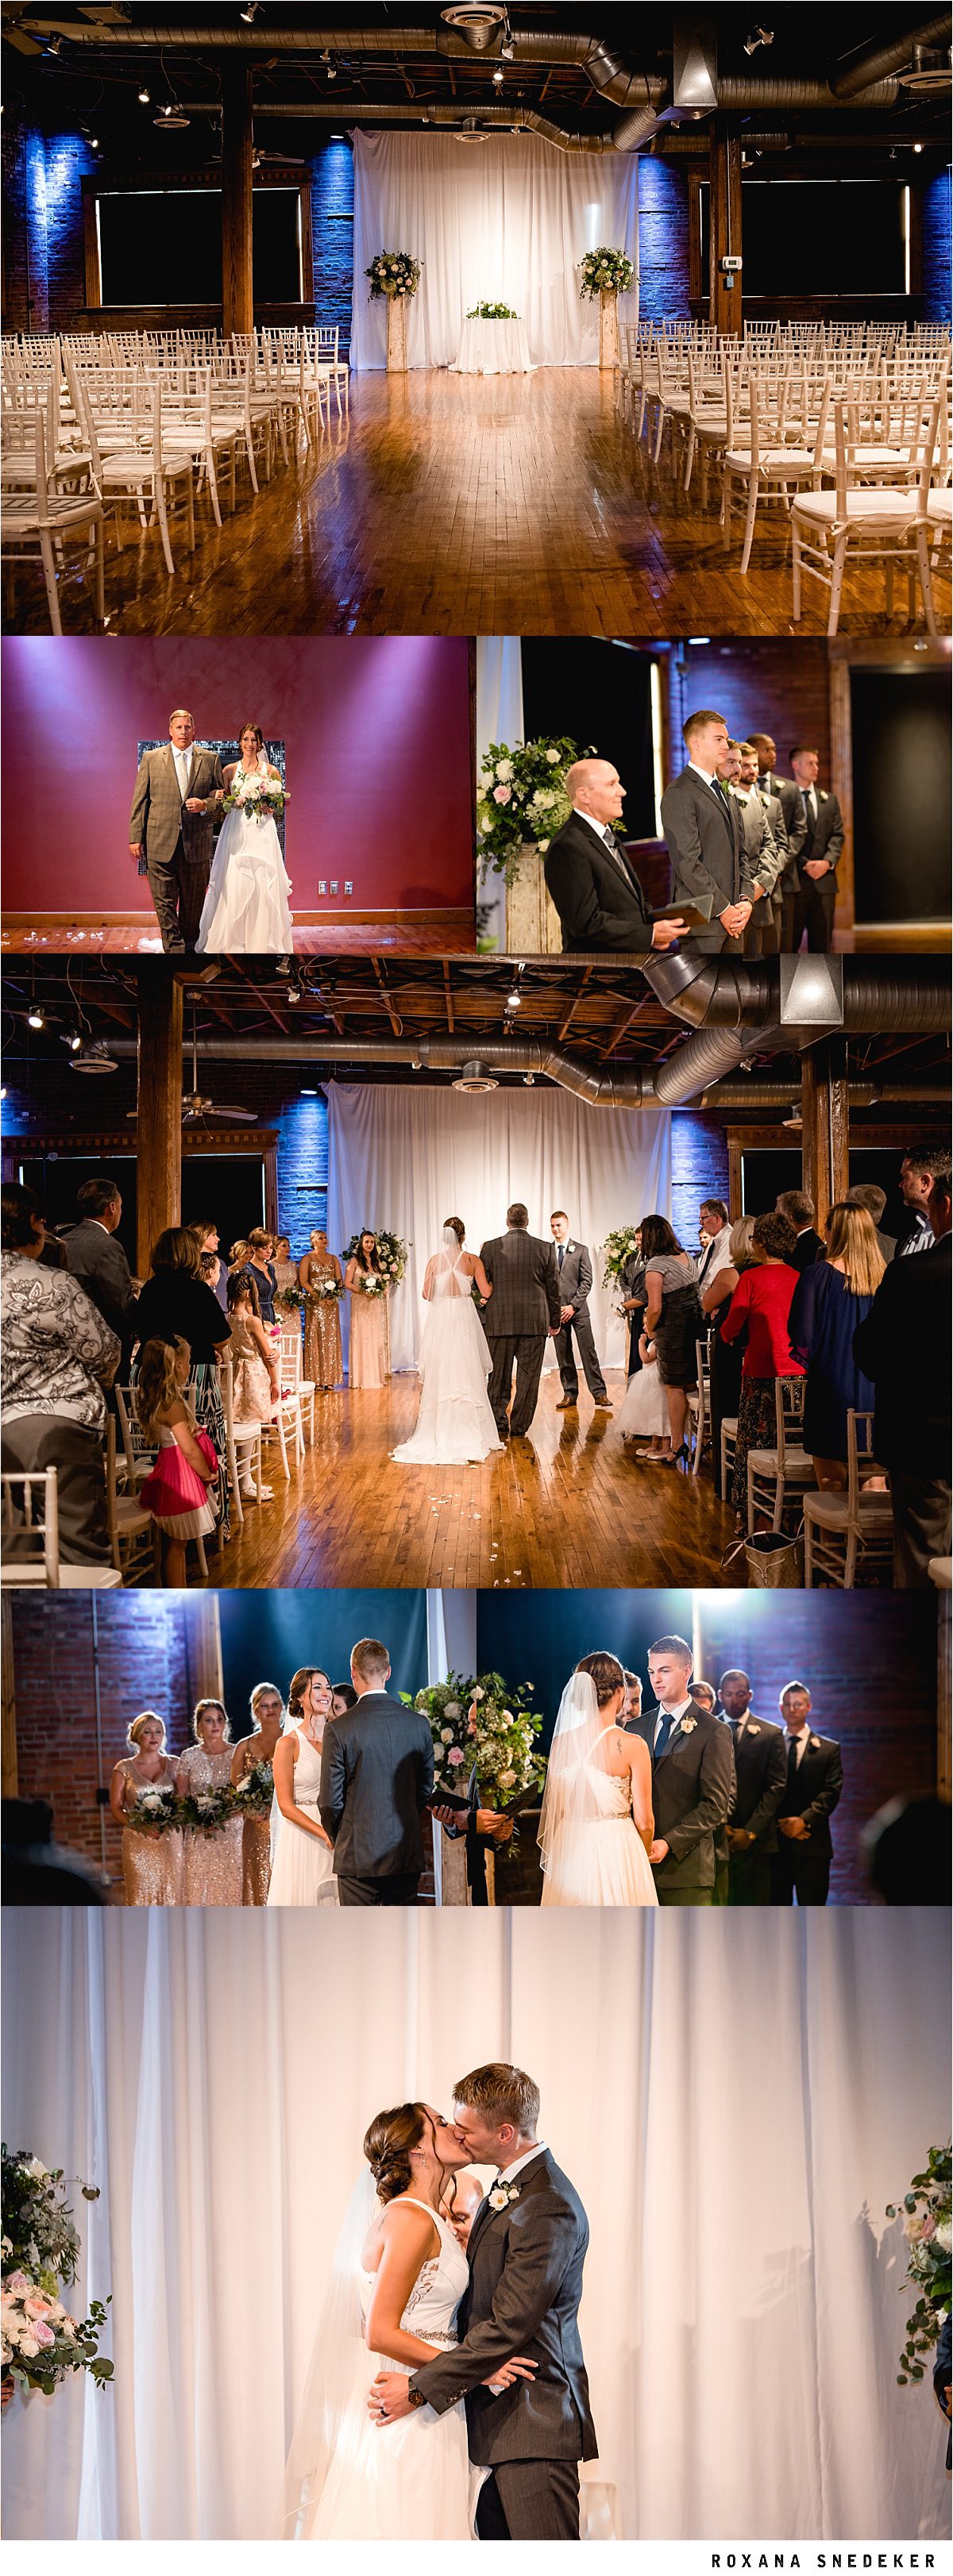 Indianapolis wedding at the Mavris arts & event center by Roxana Snedeker